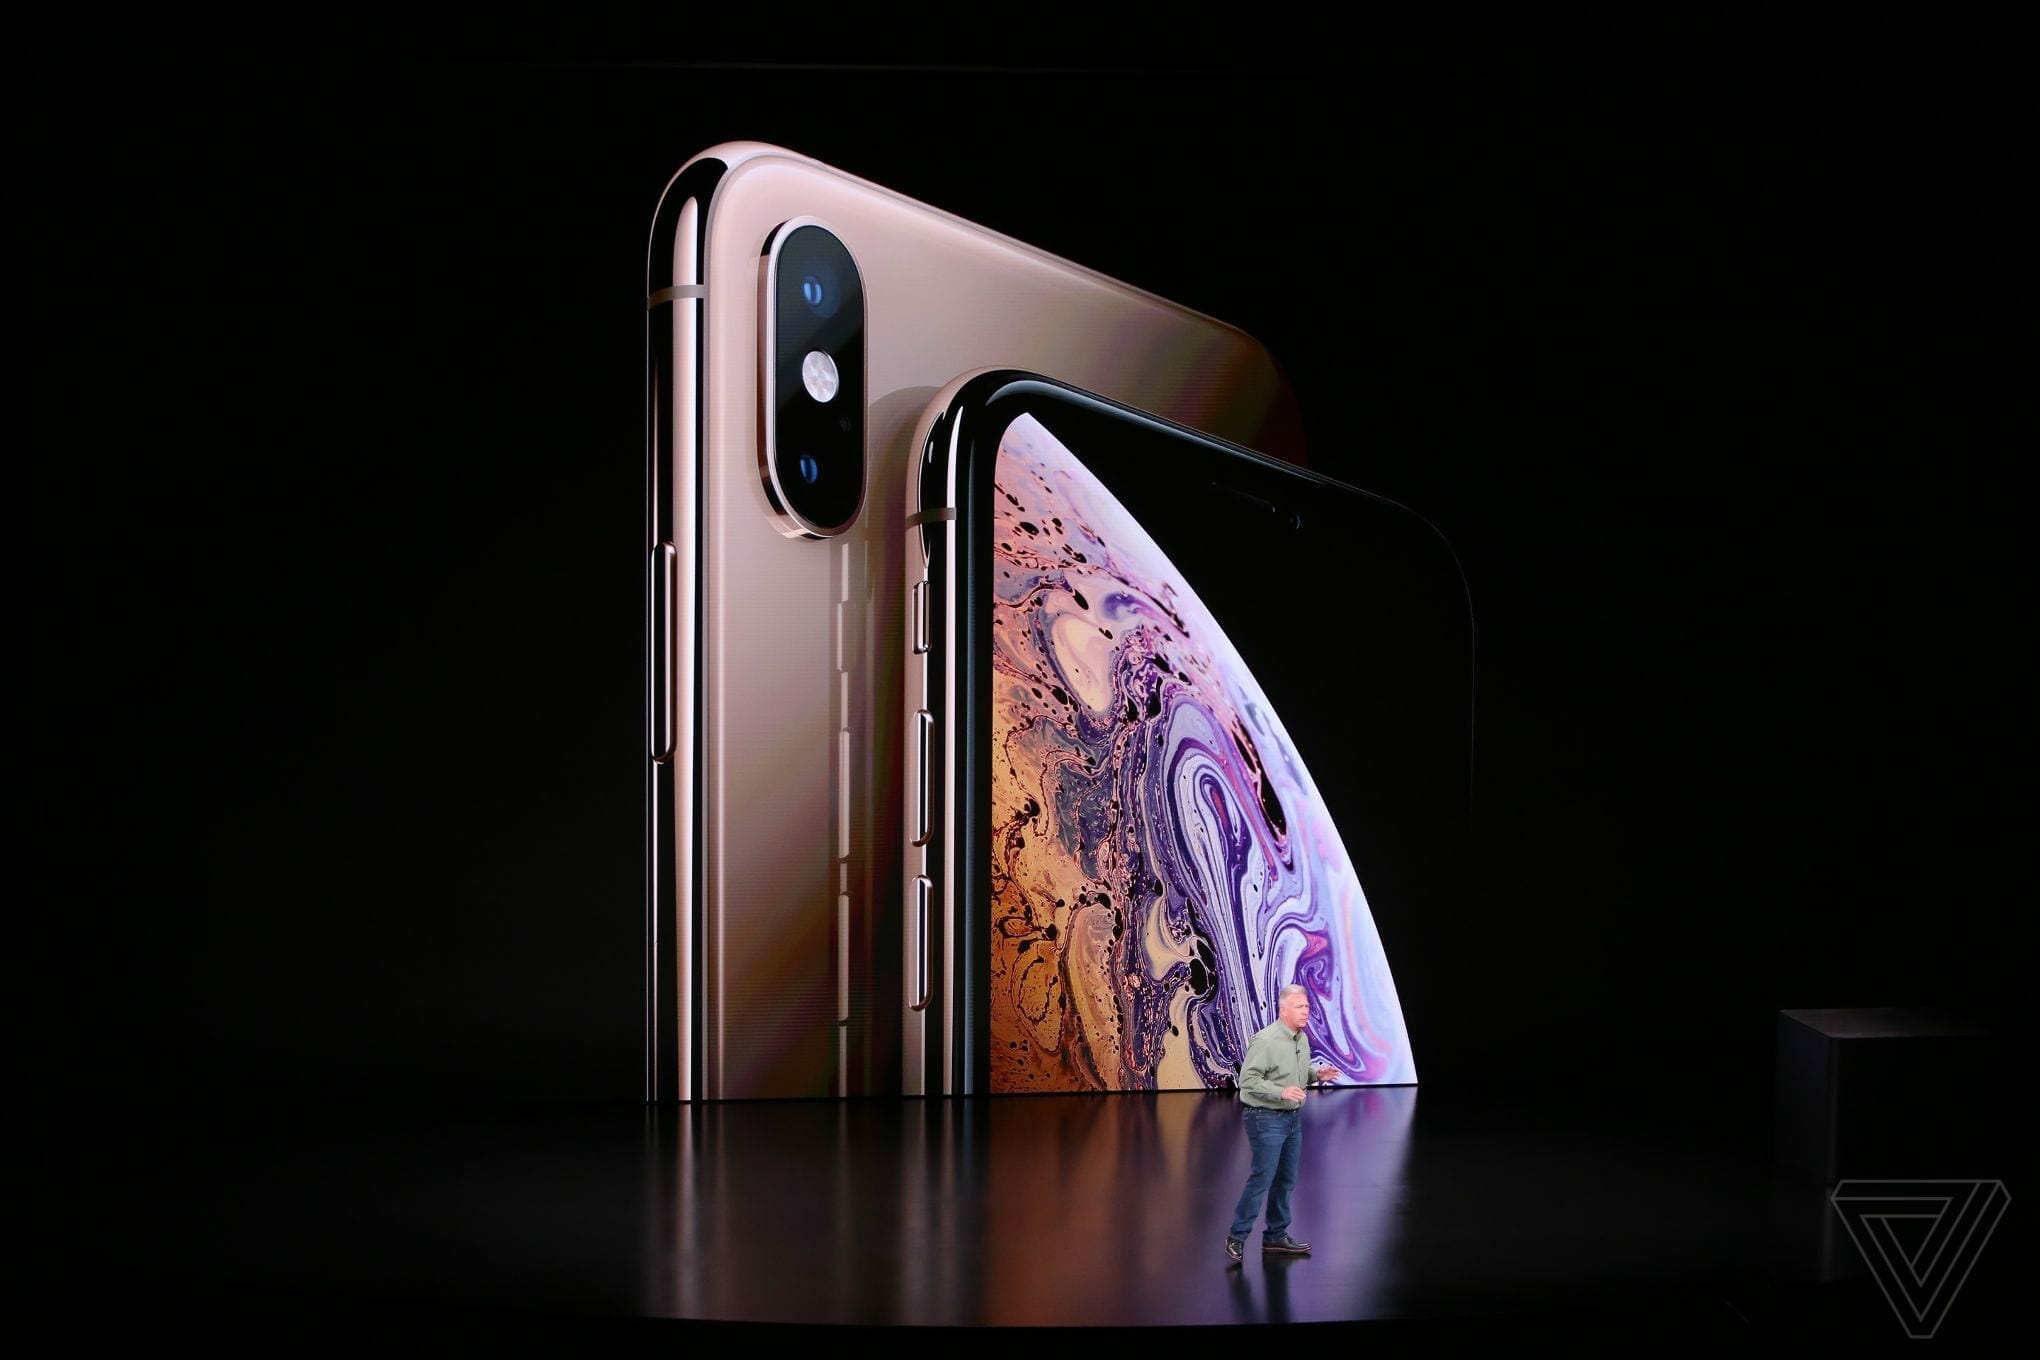 Apple iPhone XS front and back design